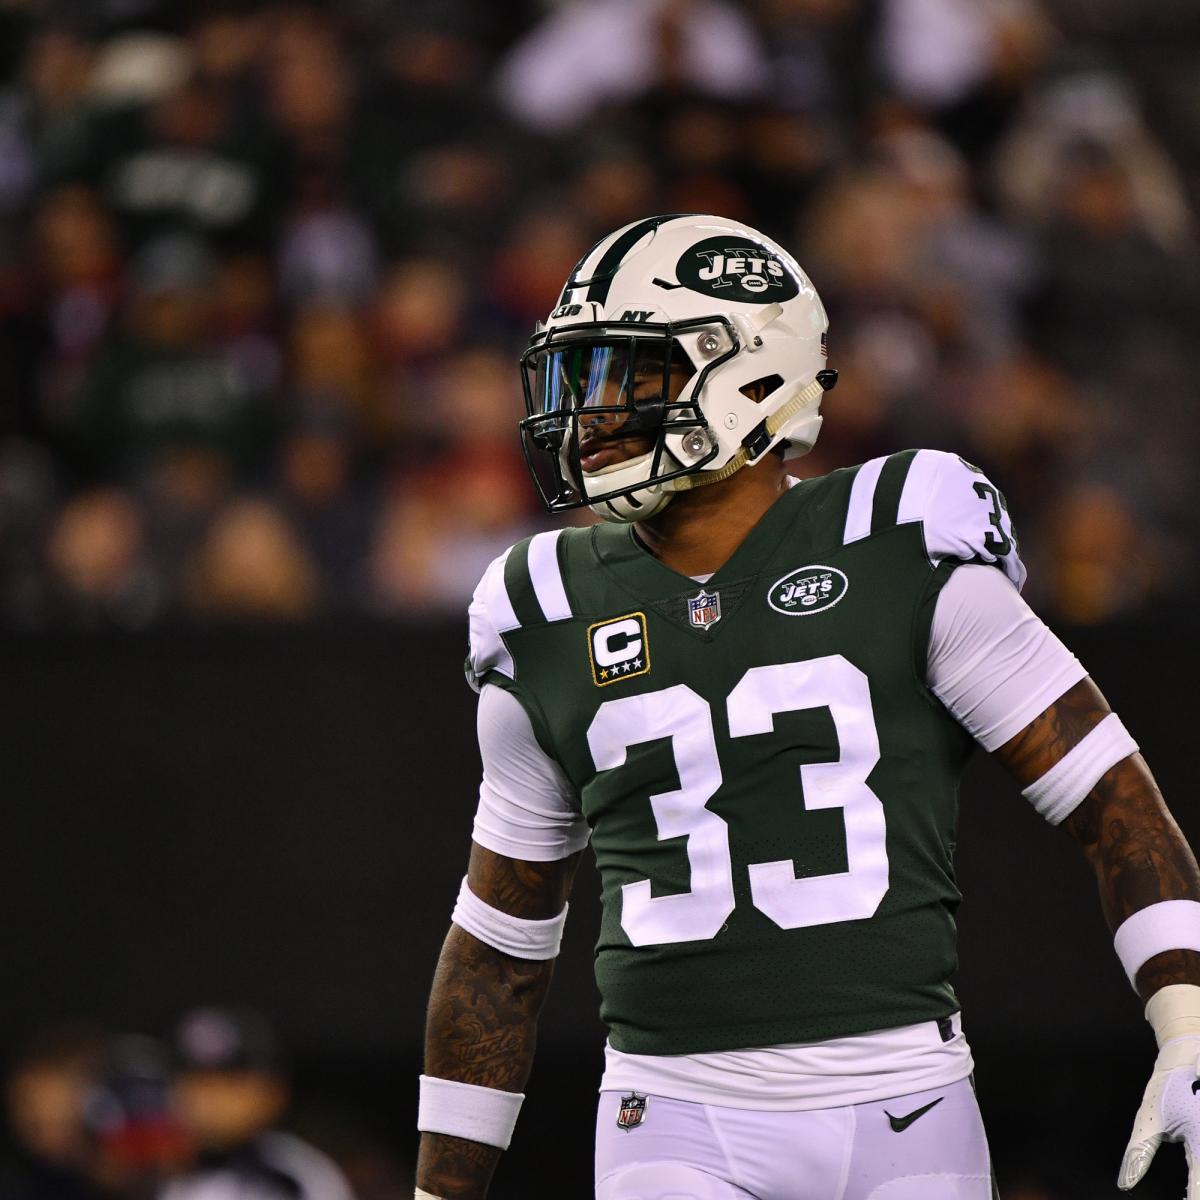 Jamal Adams on Jets Roster: Need More 'Dogs' to Be Contenders | Bleacher Report ...1200 x 1200